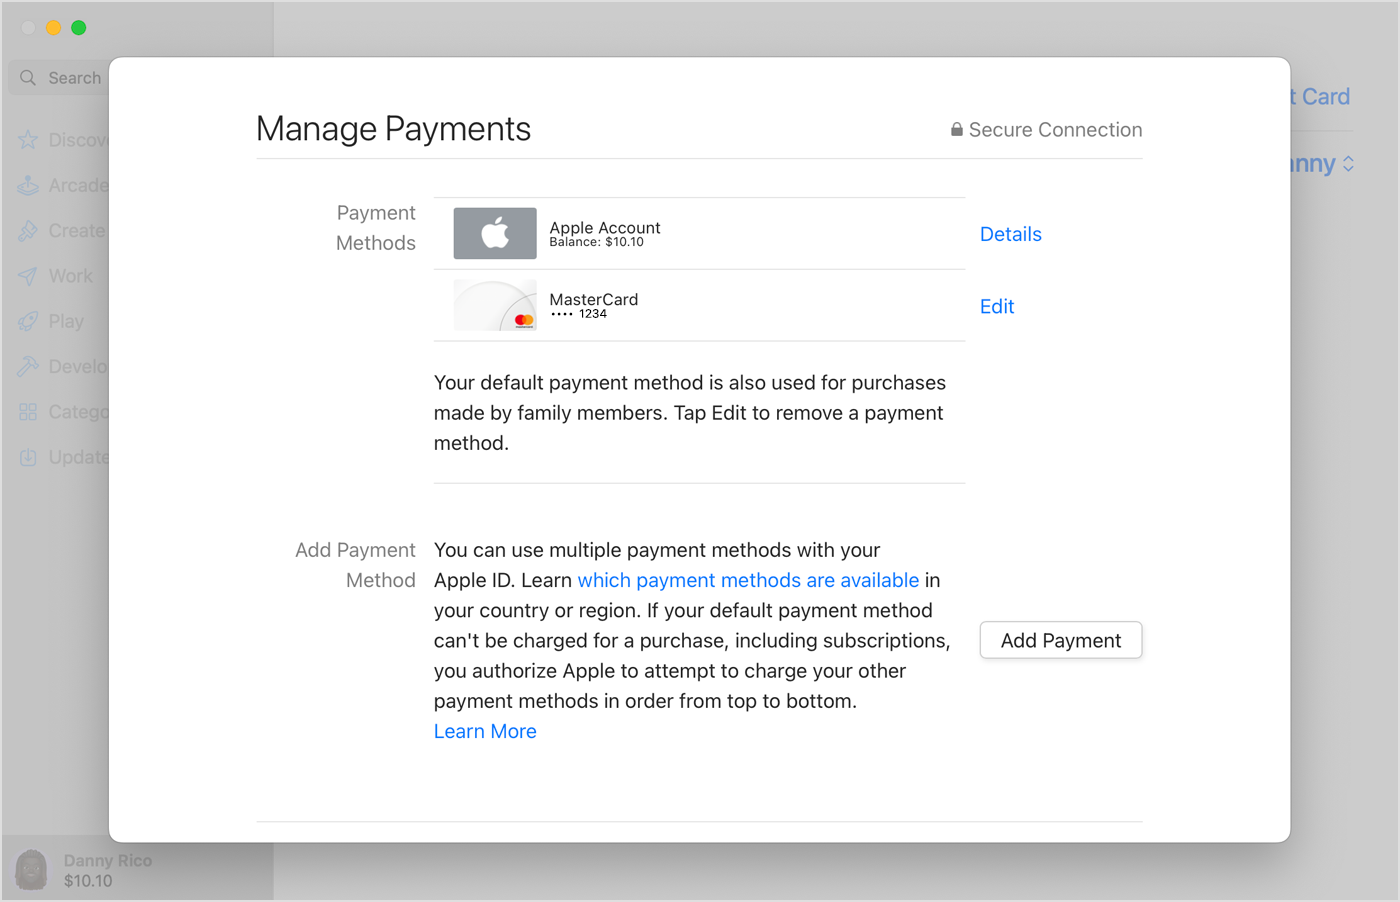 Add a payment method to your Apple ID